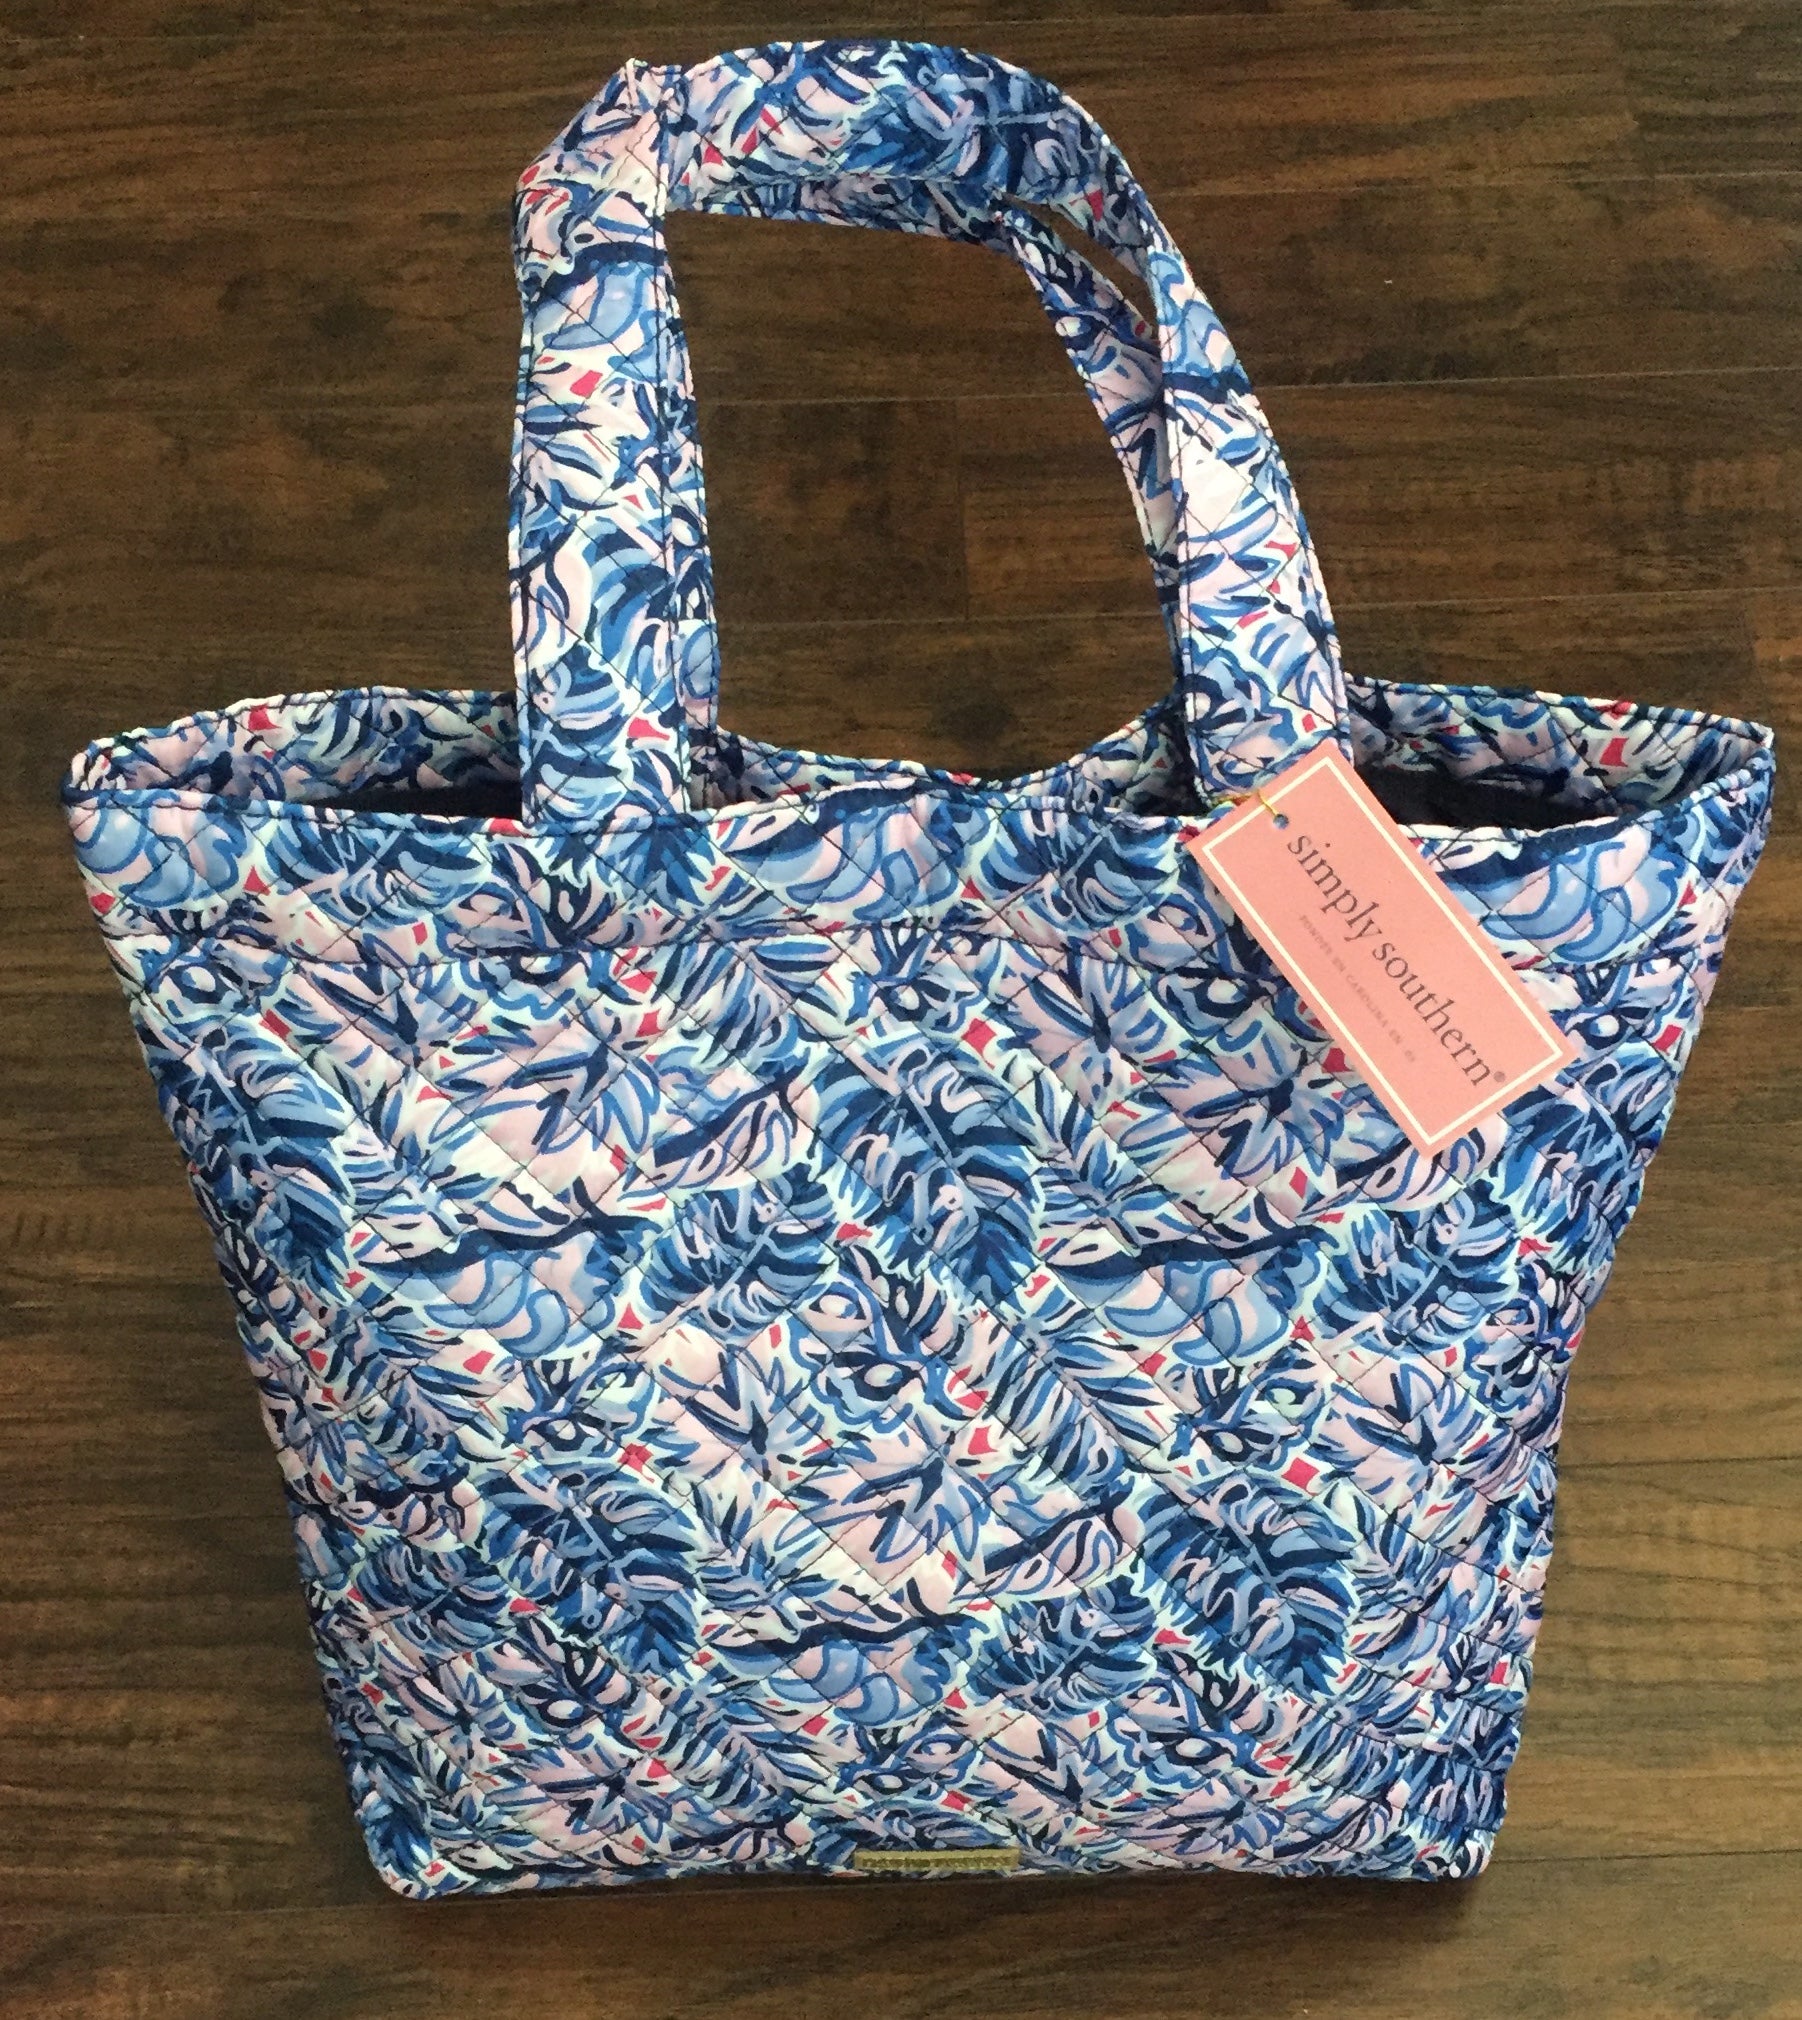 Simply Southern - Large Tote Bag